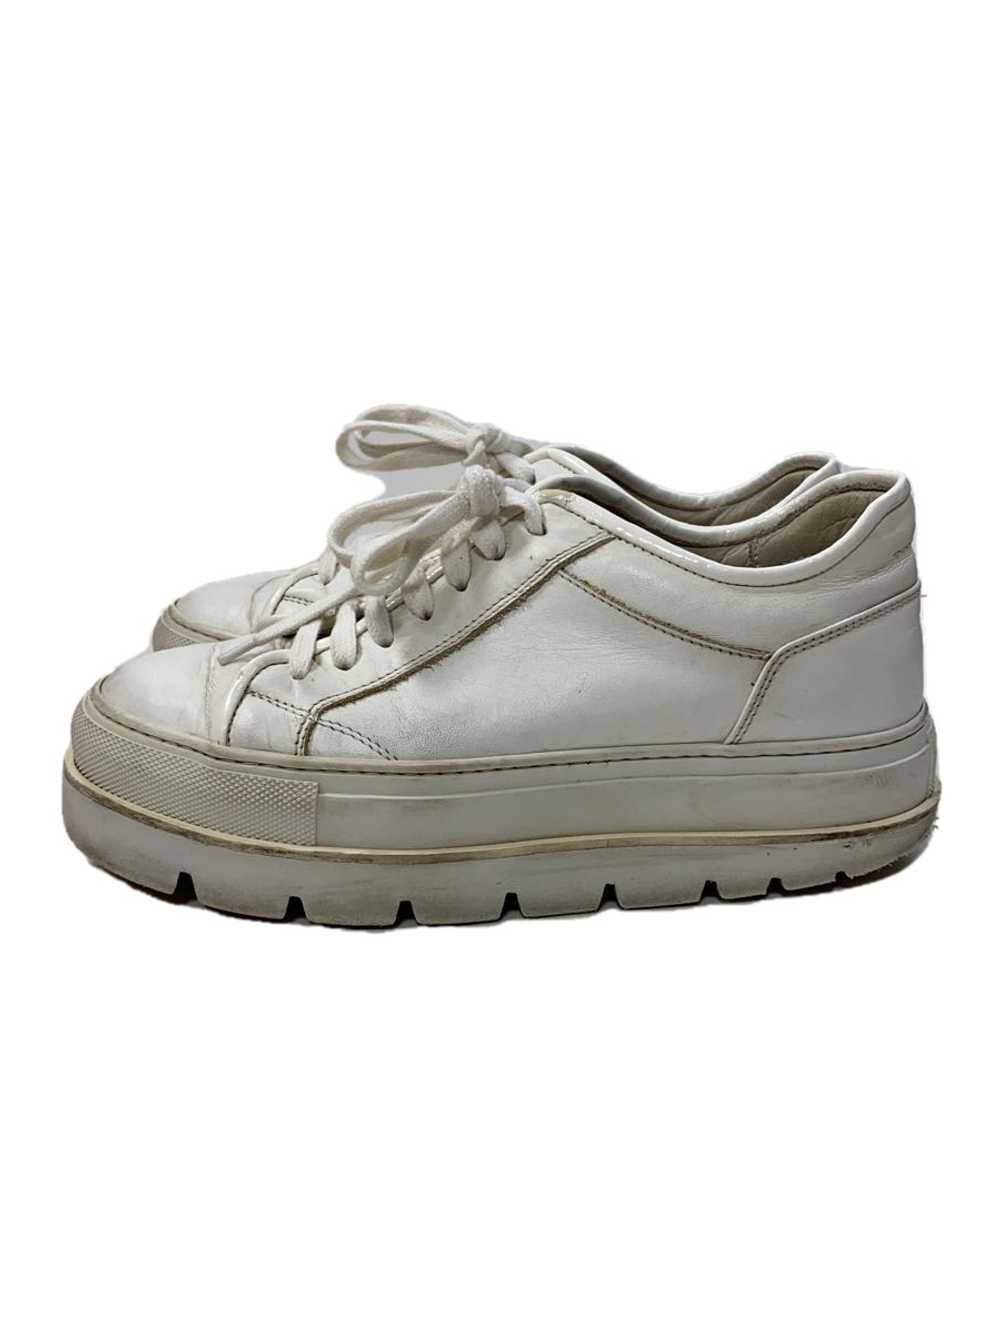 Mm6 Low Cut Sneakers/36/White Shoes BLA35 - image 1